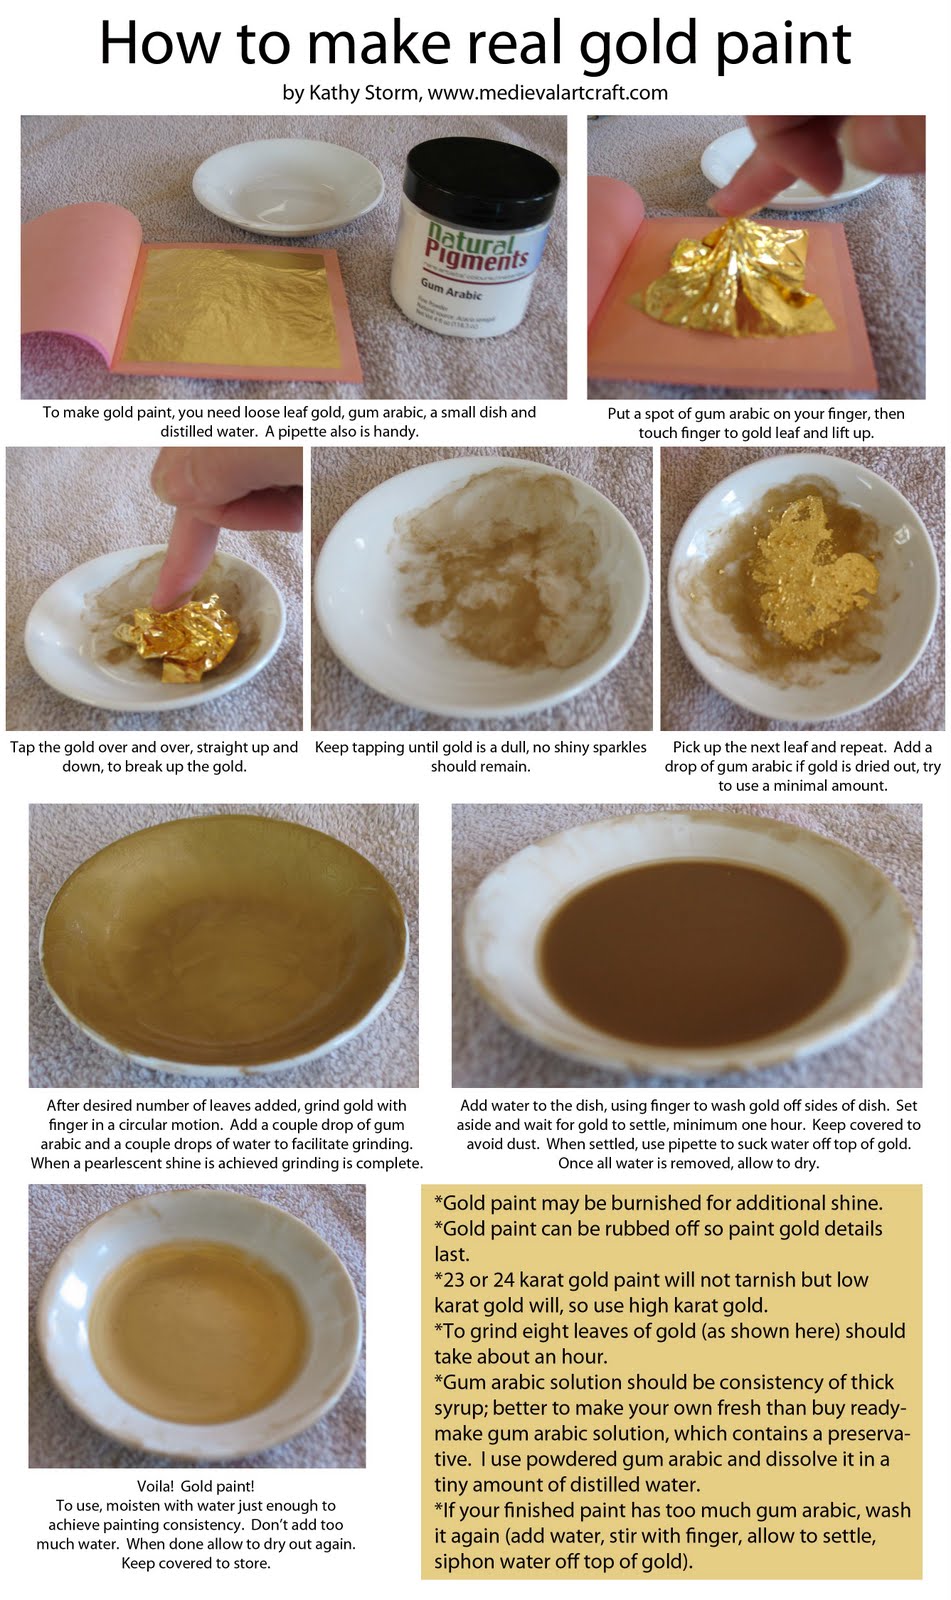 Medieval Arts & Crafts: How to make gold paint